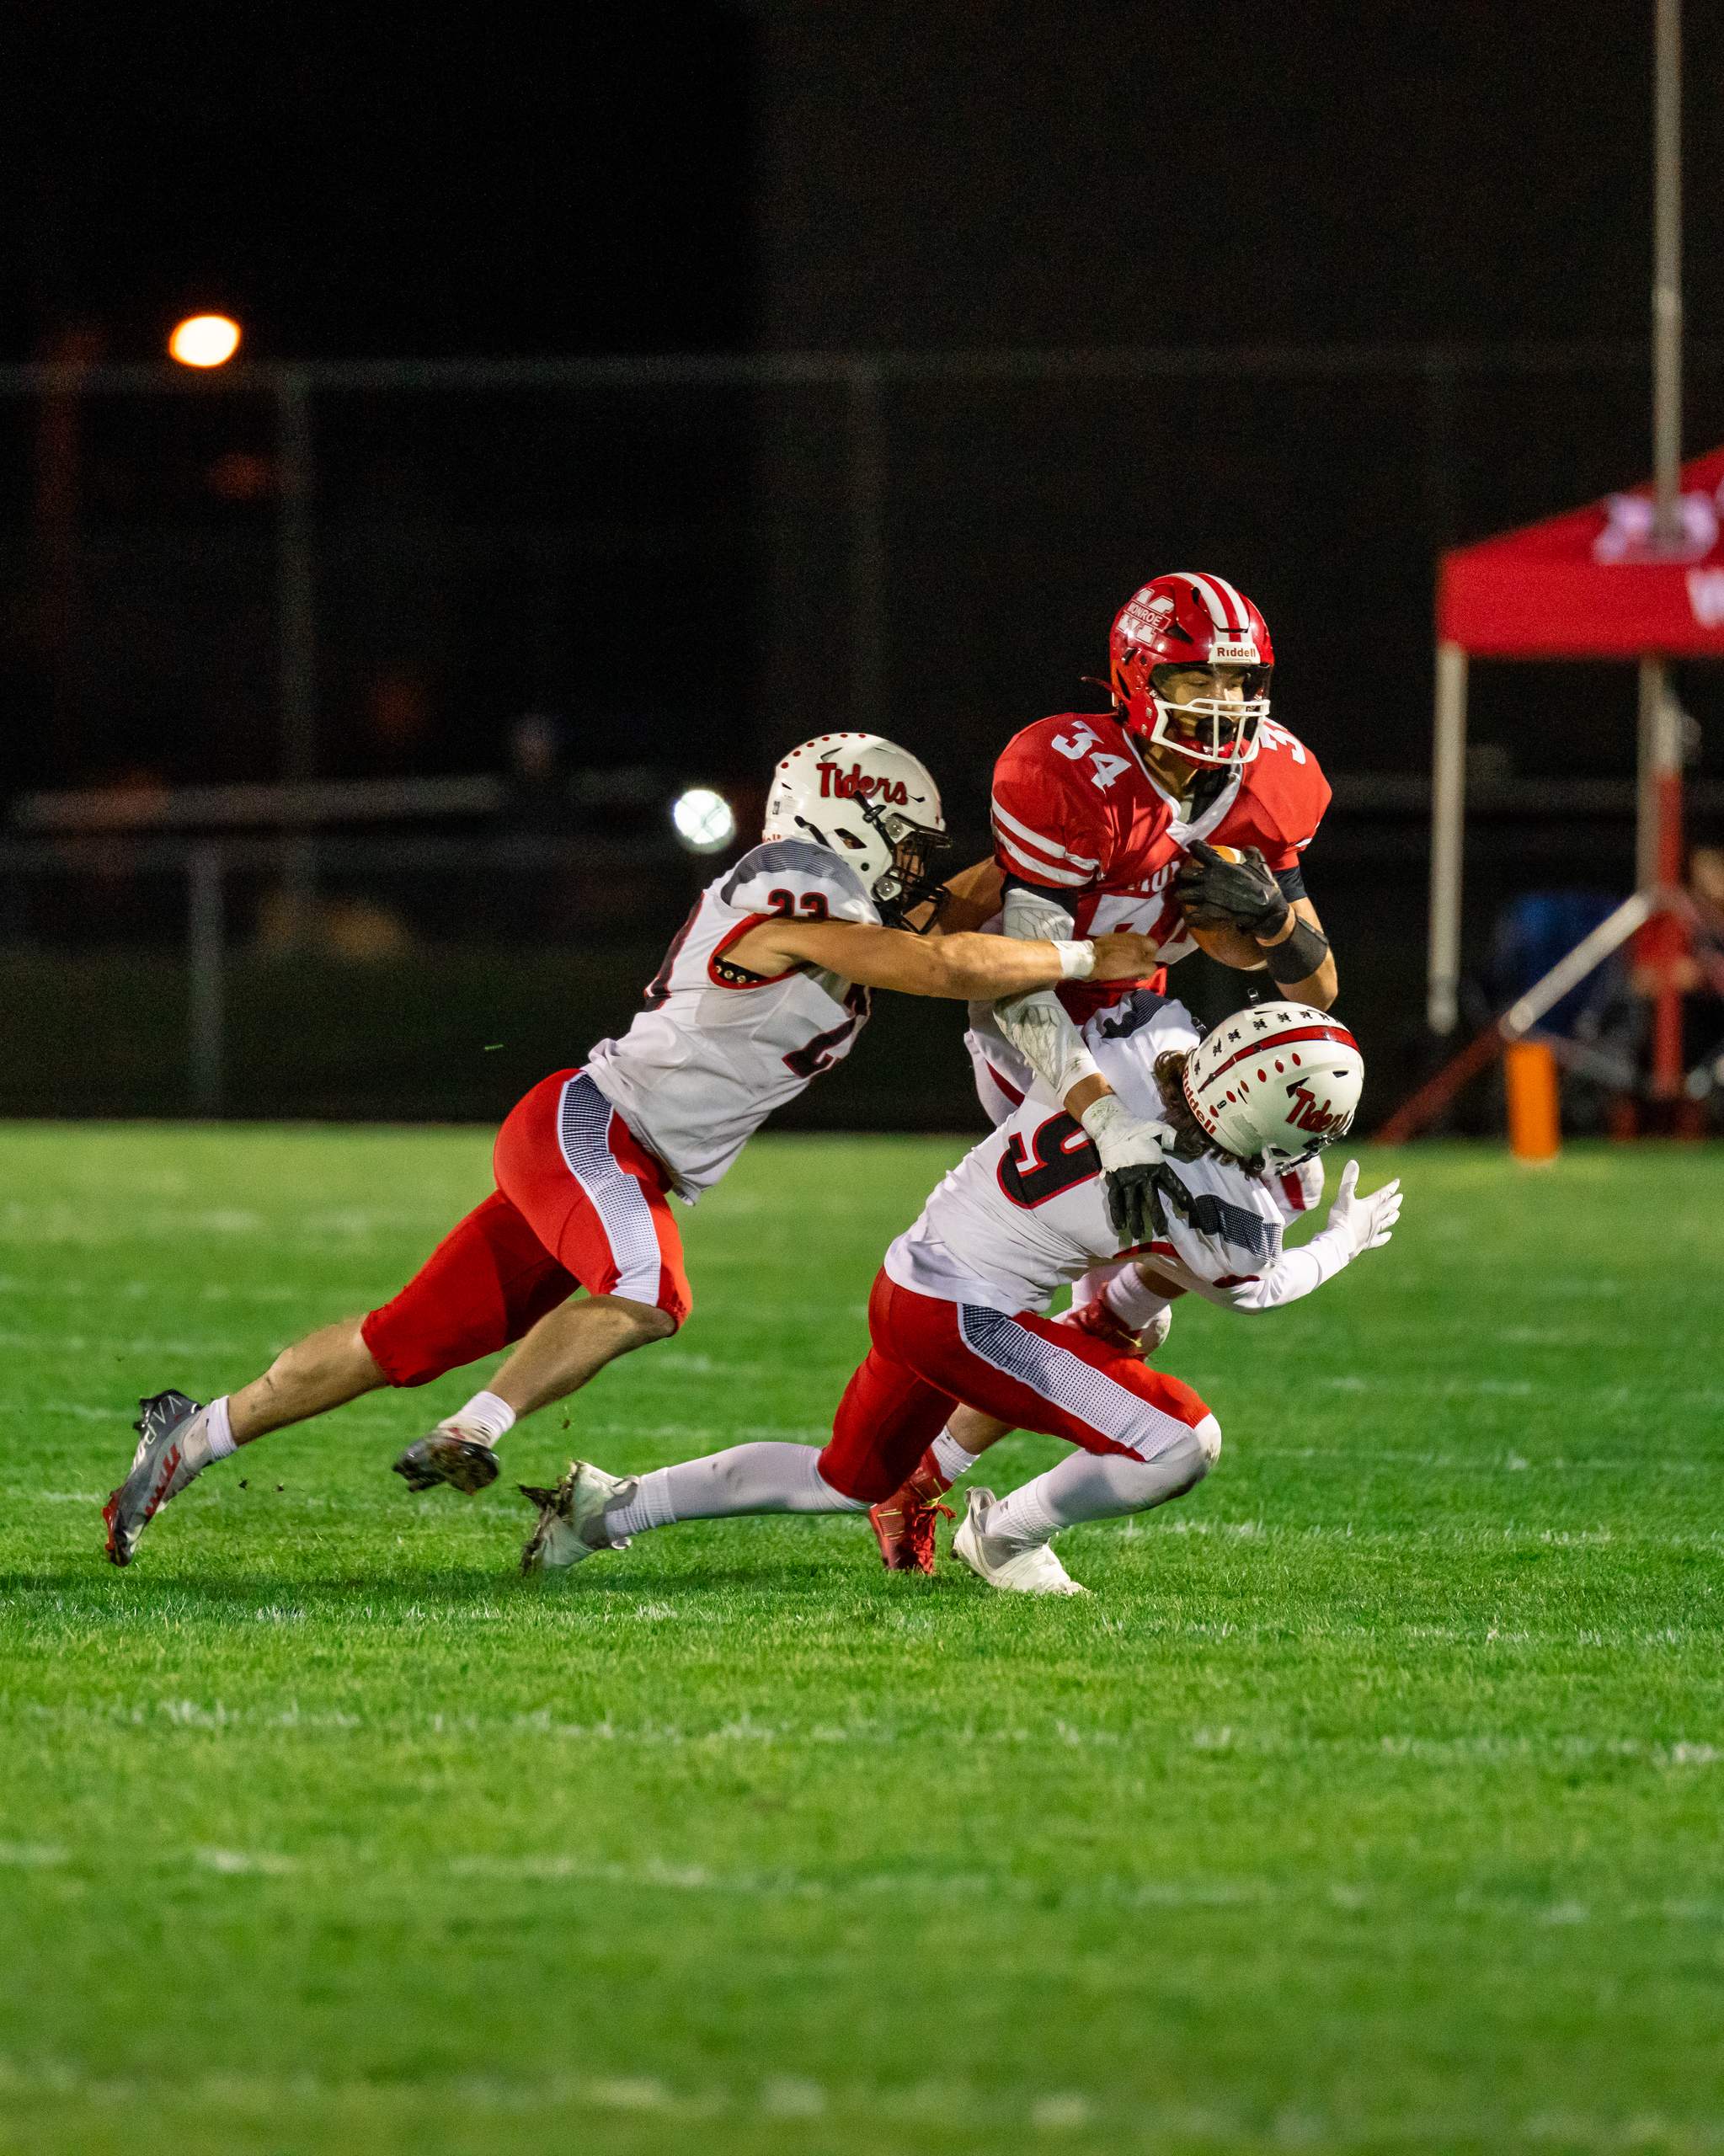 Monroe vs Edgerton September 30th, 2022, photography by Ross Harried for Second Crop Sports